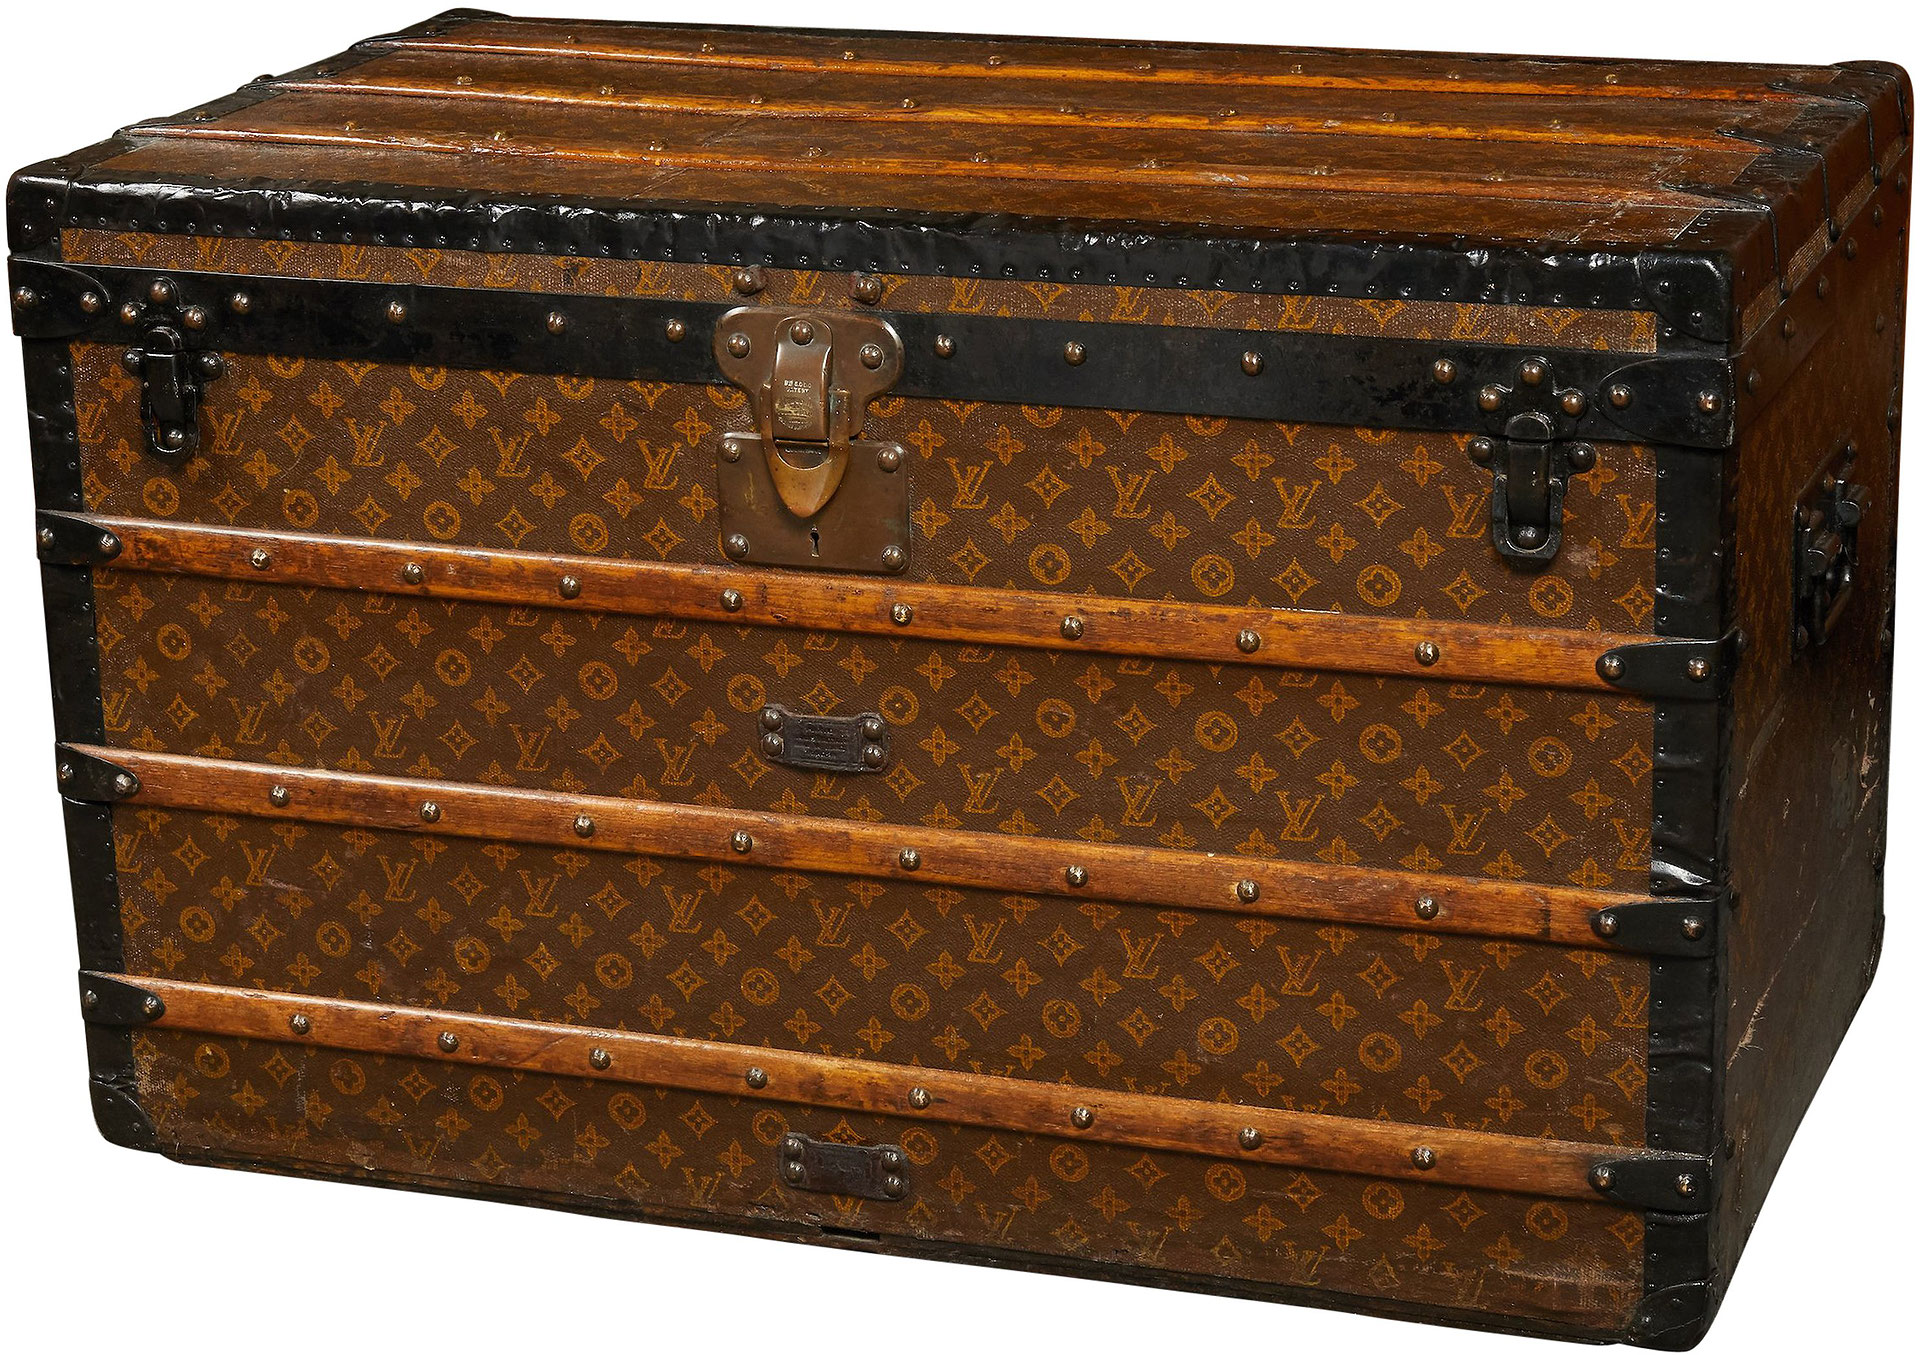 Early Louis Vuitton Steamer Trunk - Milord antiques, Montreal